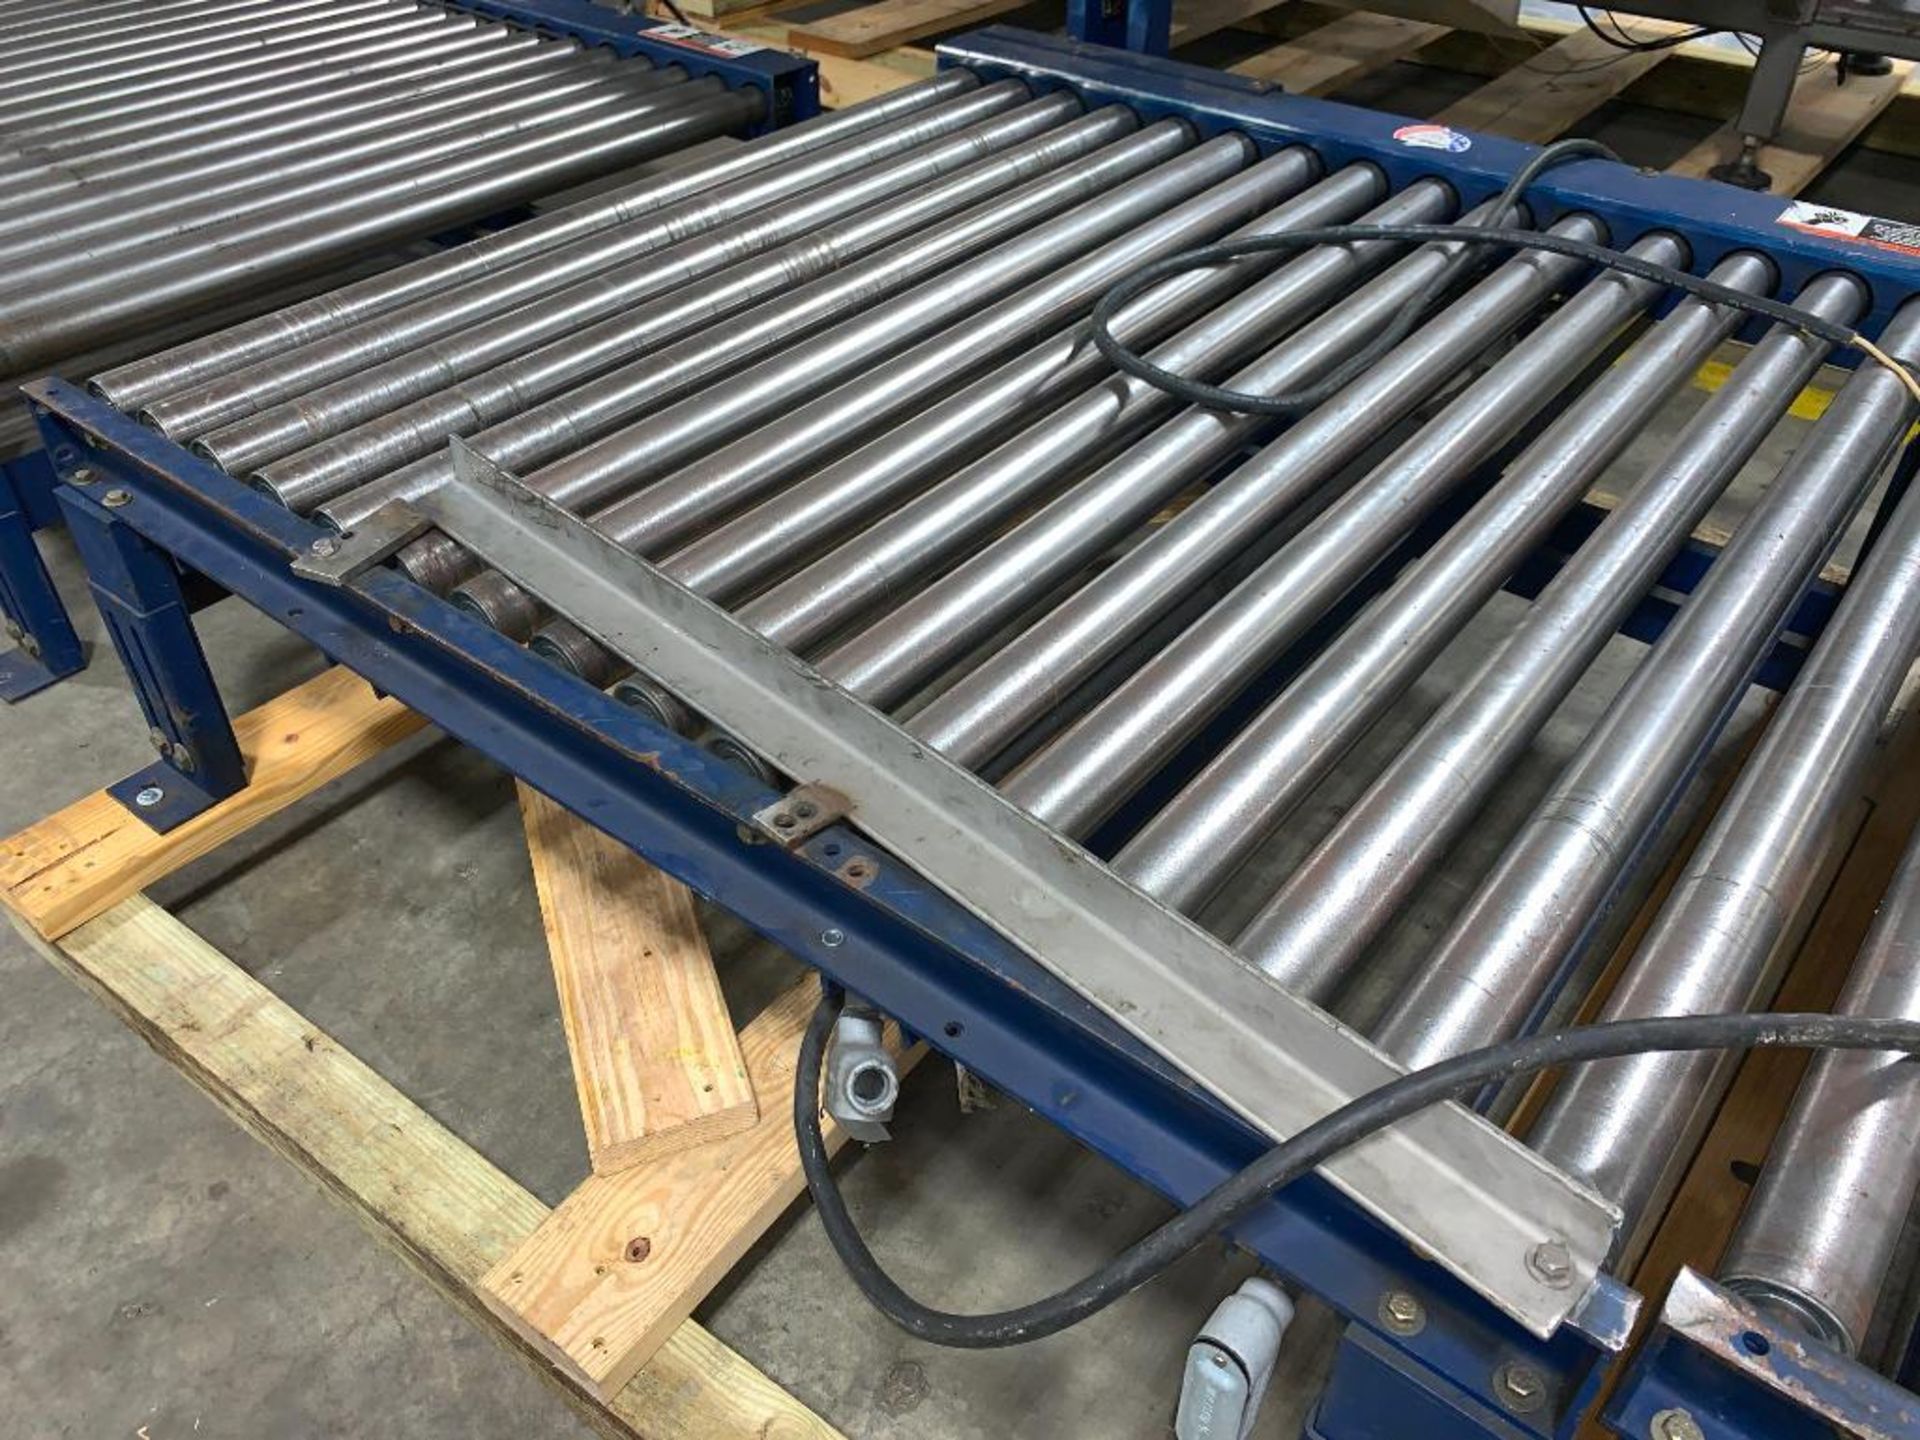 (6) skids of Lantech full pallet conveyor including turntable section - Located in Tifton, GA - Image 17 of 19